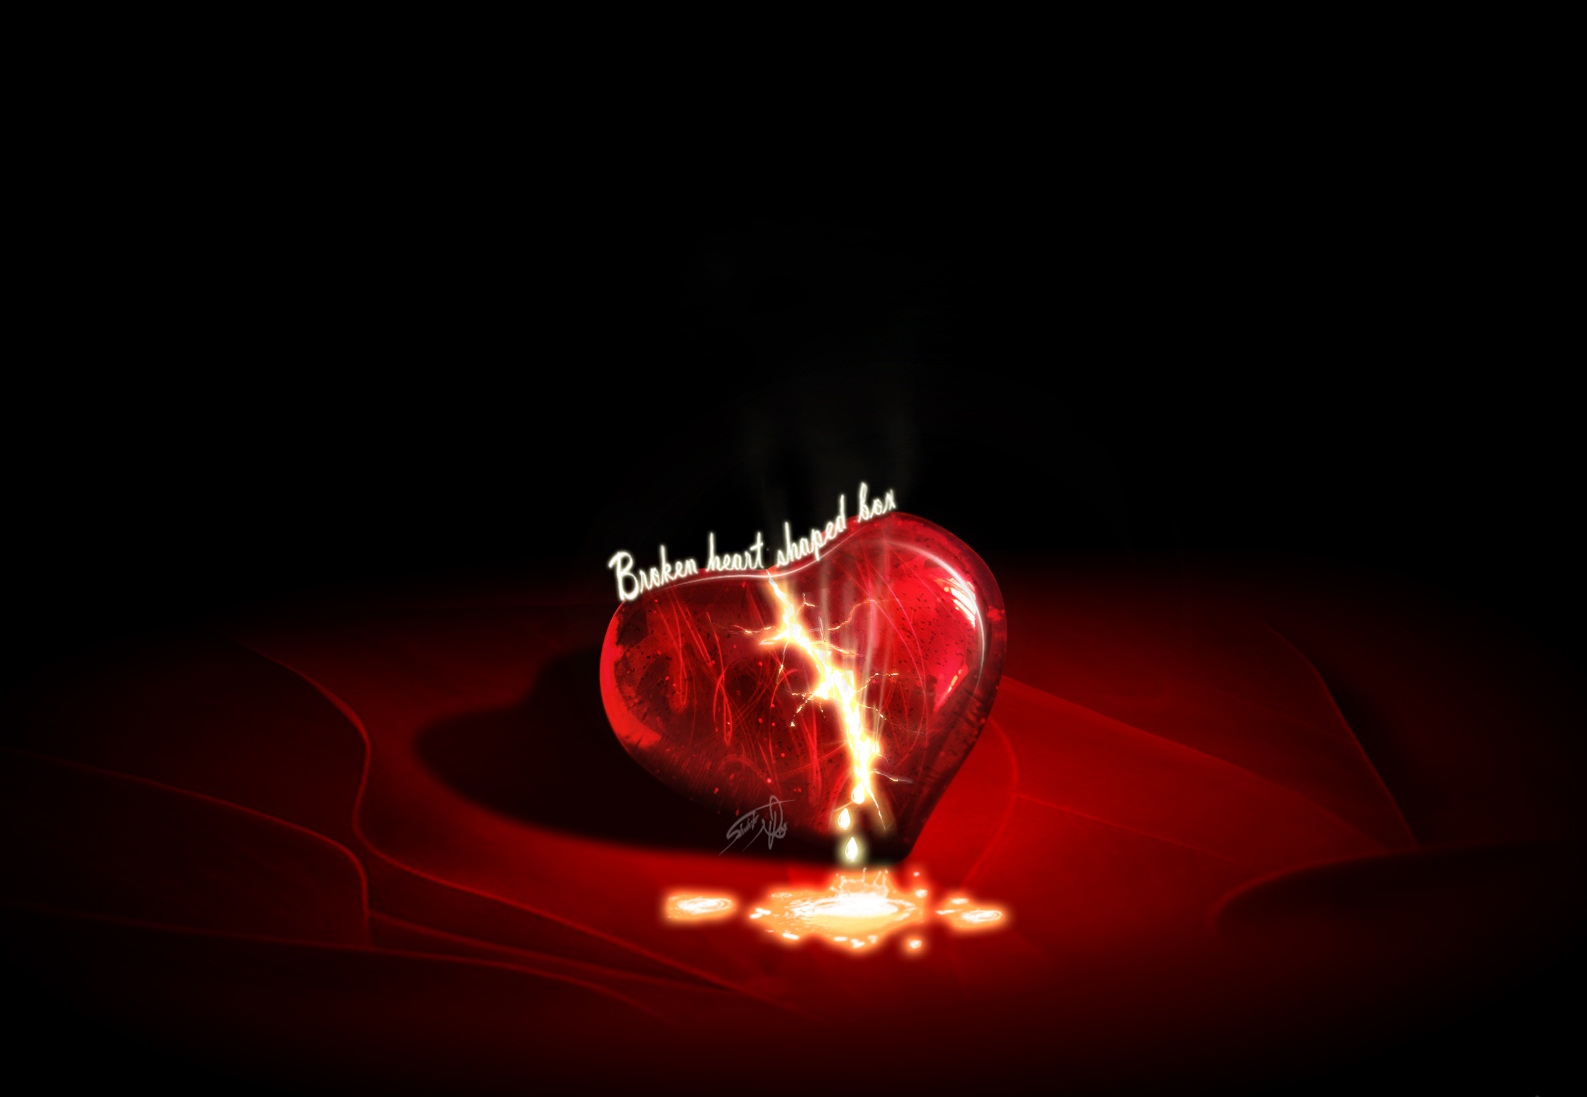 Heart HD Wallpaper And Make This For Your Desktop Tablet